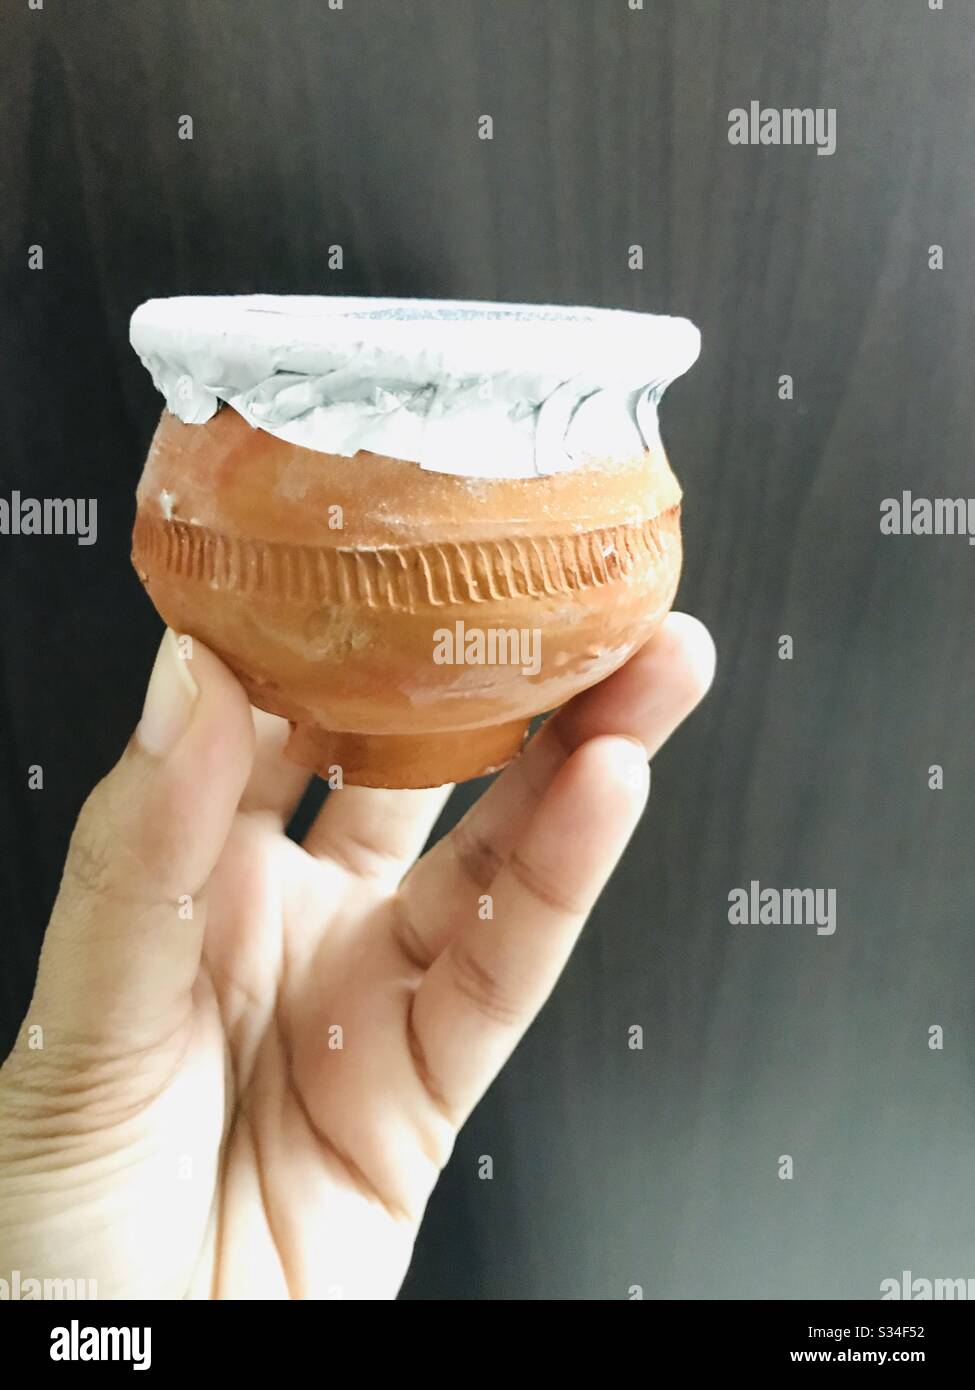 Hand holding designed Kulfi clay pot covered with aluminium foil against black rough surface-frozen dairy dessert originated from India, traditional Indian ice cream in earthen pot- Stock Photo